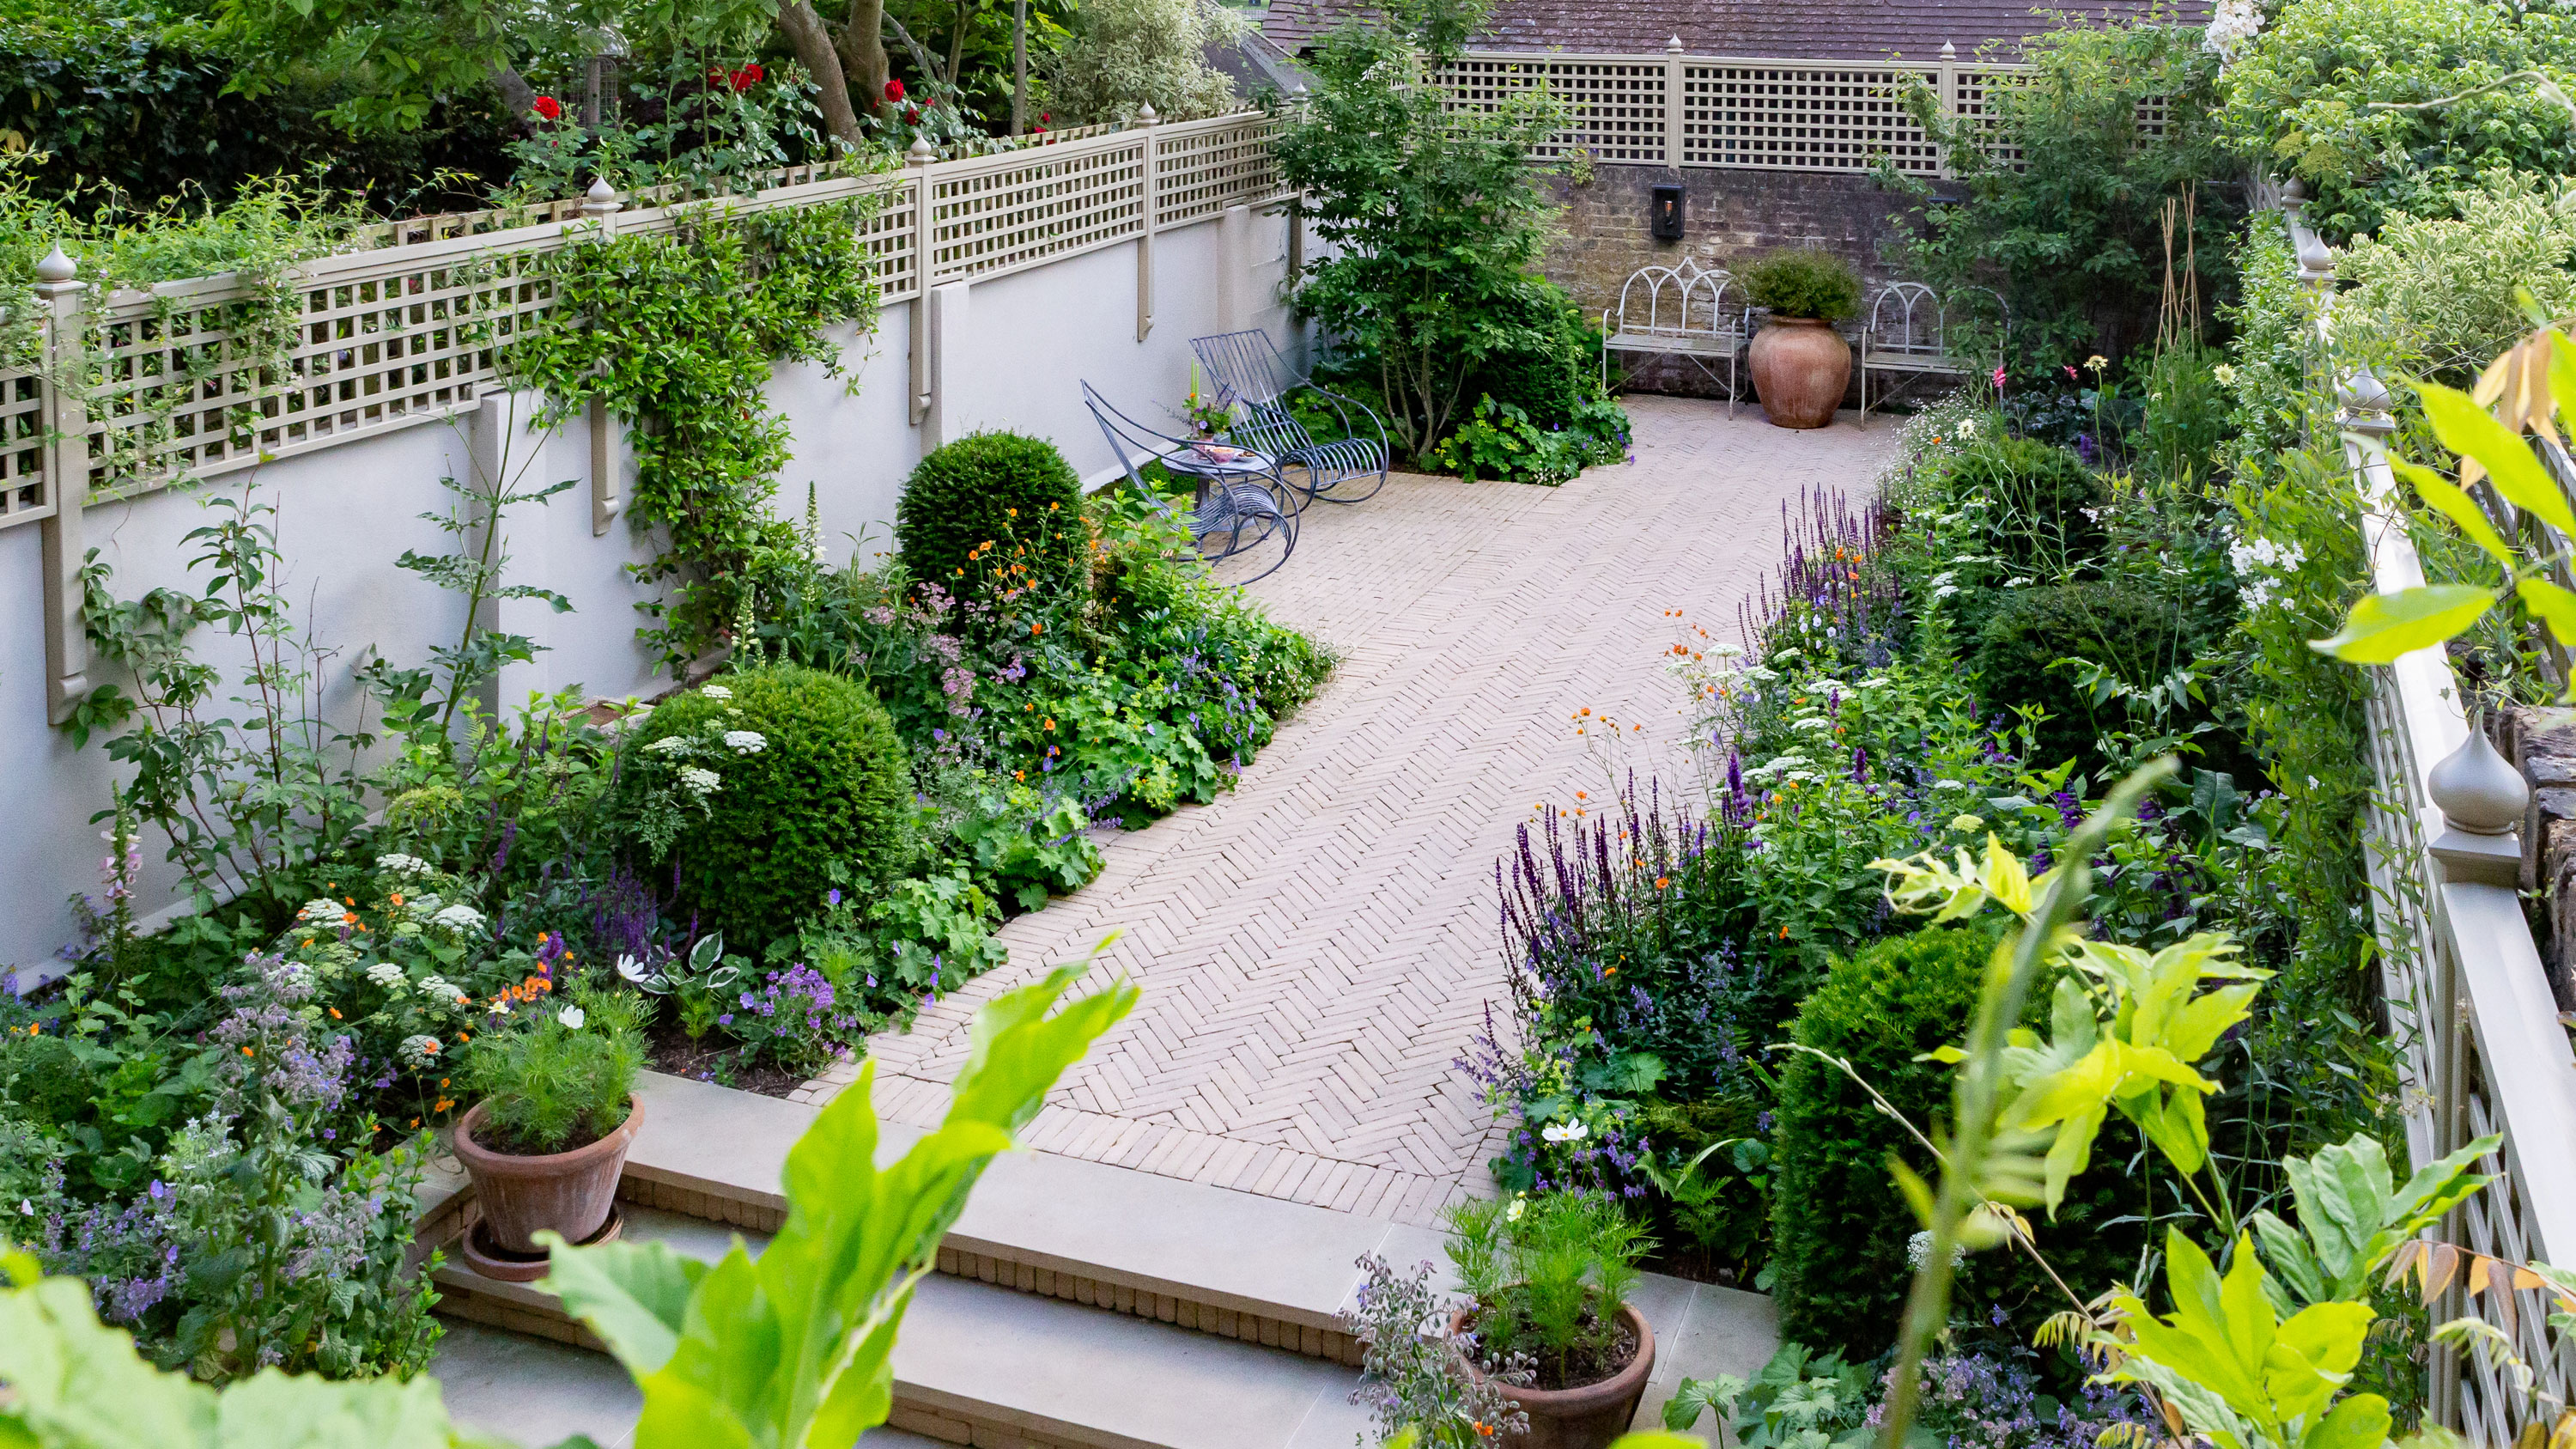 5 design ideas to inspire from this narrow and small garden |